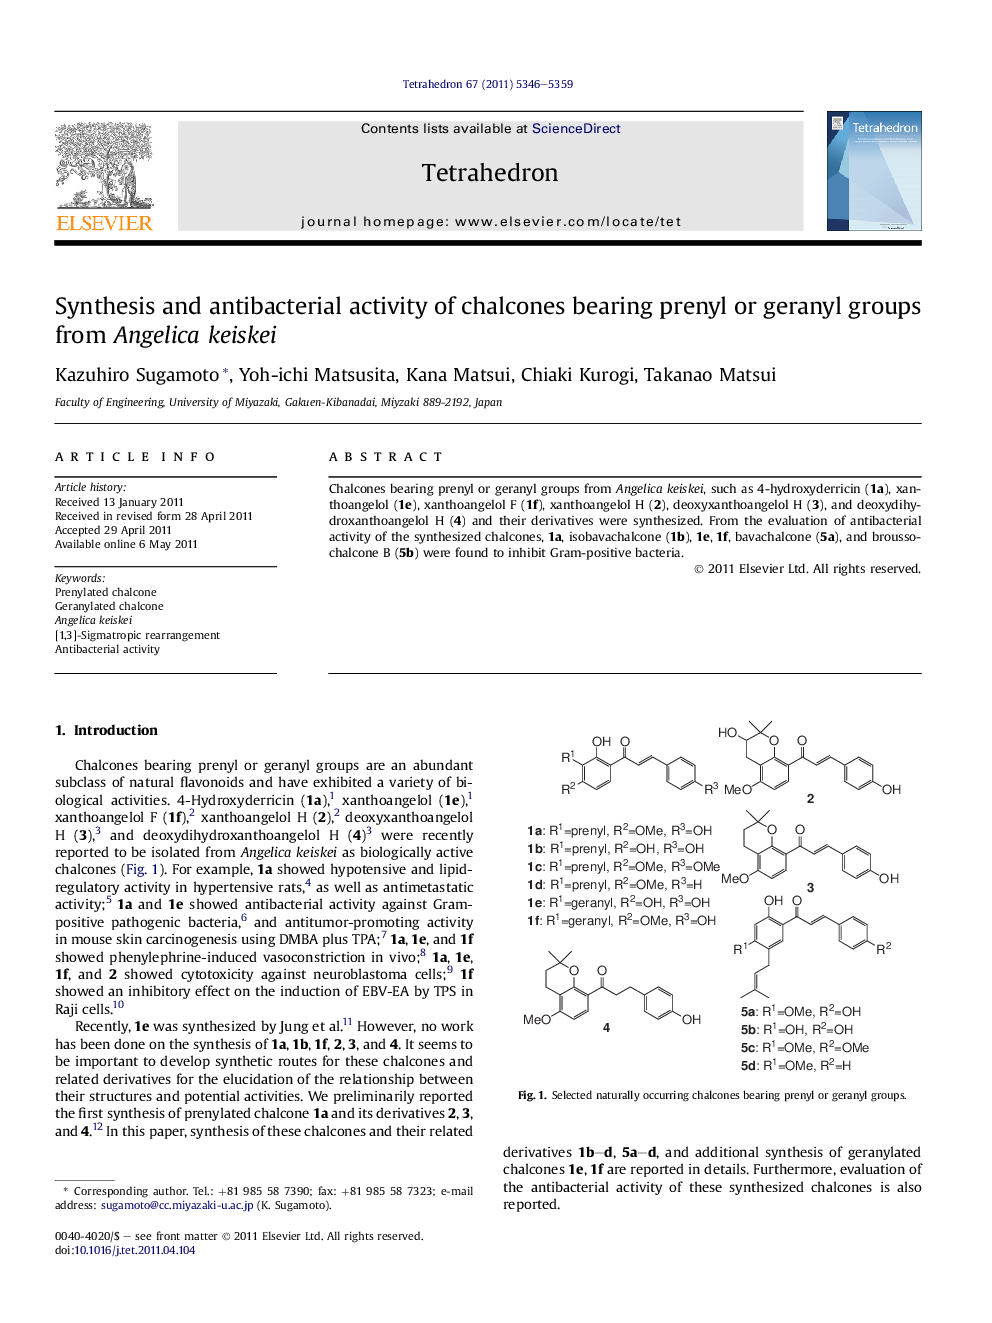 Synthesis and antibacterial activity of chalcones bearing prenyl or geranyl groups from Angelica keiskei